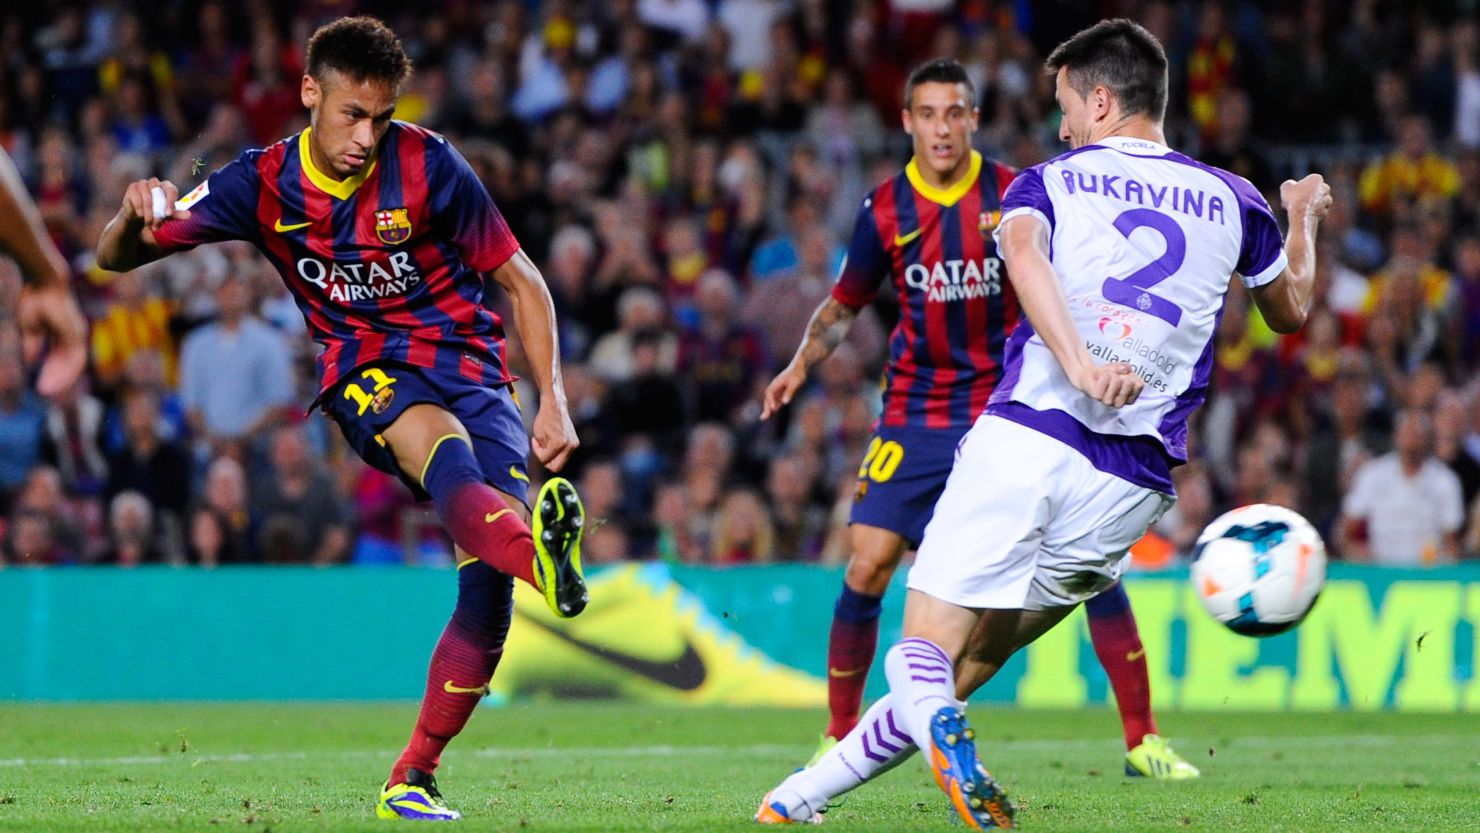 Neymar scores Barcelona's final goal in Saturday's 4-0 victory against Real Valladolid at Camp Nou.